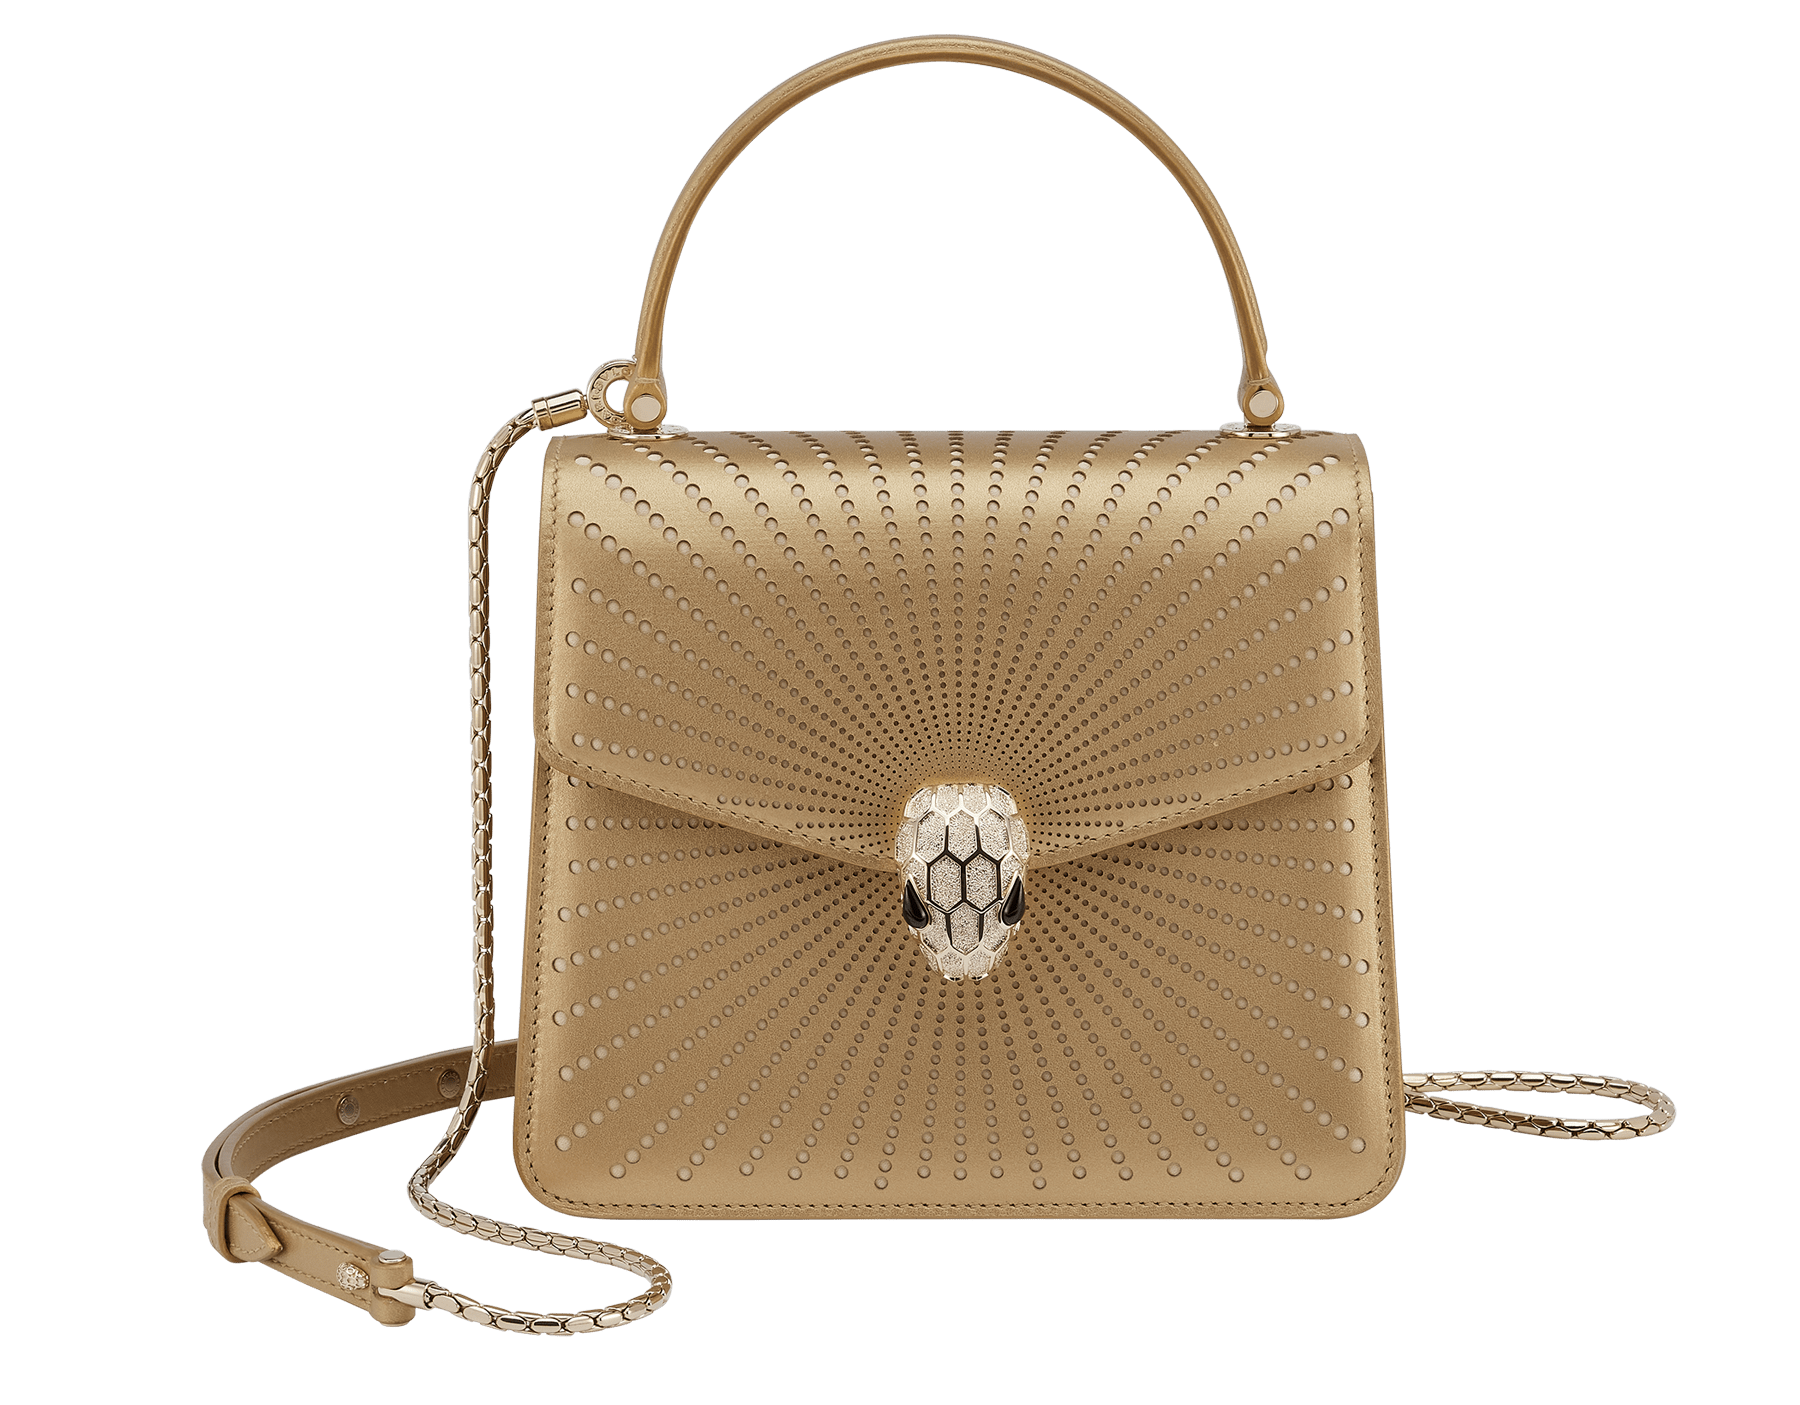 Serpenti Forever top handle bag in ivory opal laser-cut calf leather with caramel topaz beige nappa leather lining. Captivating snakehead closure in light gold-plated brass embellished with matt and shiny ivory opal enamel scales and black onyx eyes. 752-LCL image 1